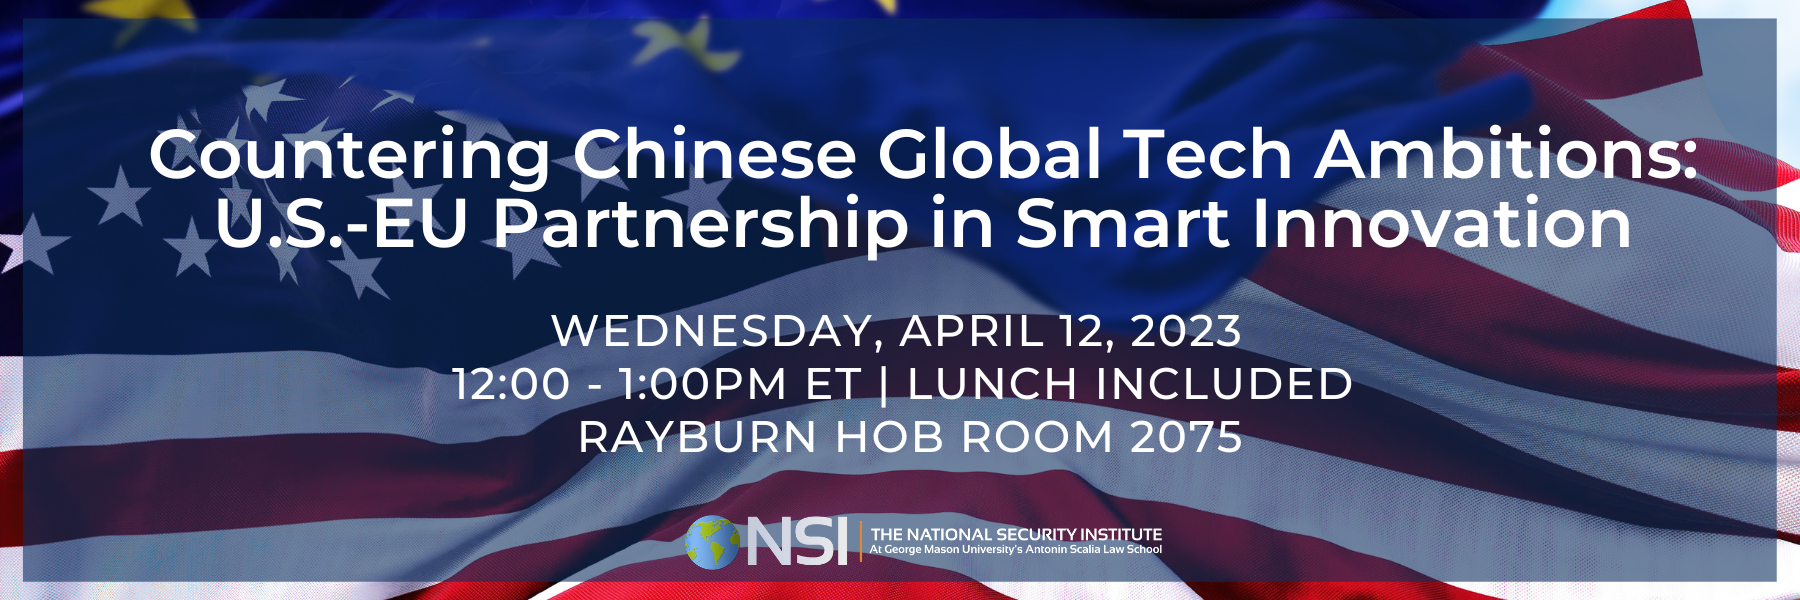 Countering Chinese Global Tech Ambitions: U.S.-EU Partnership in Smart Innovation